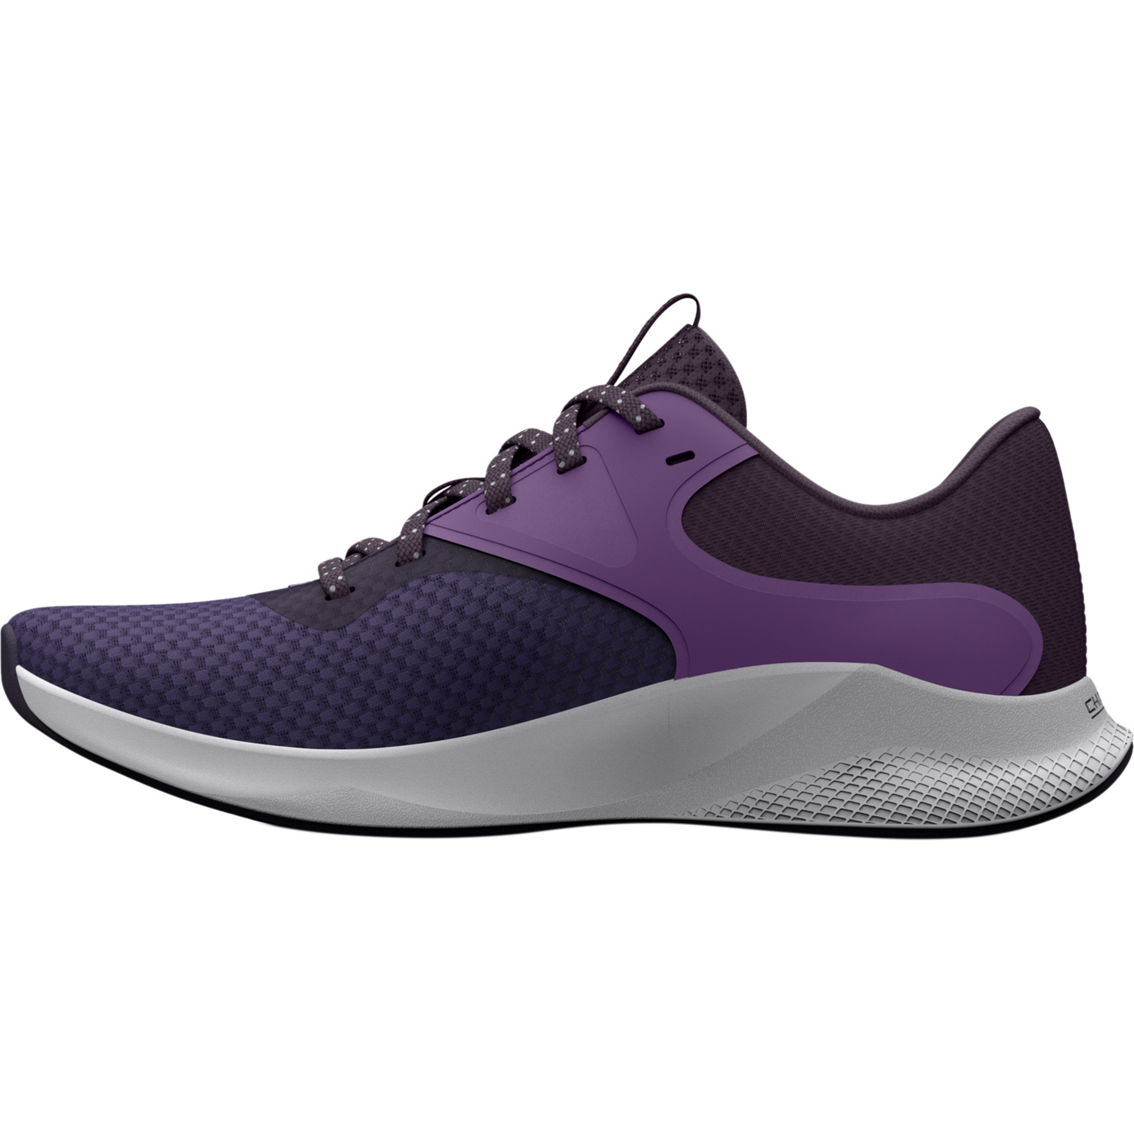 Under Armour Women's UA Charged Aurora 2 Training Shoes - Image 3 of 5